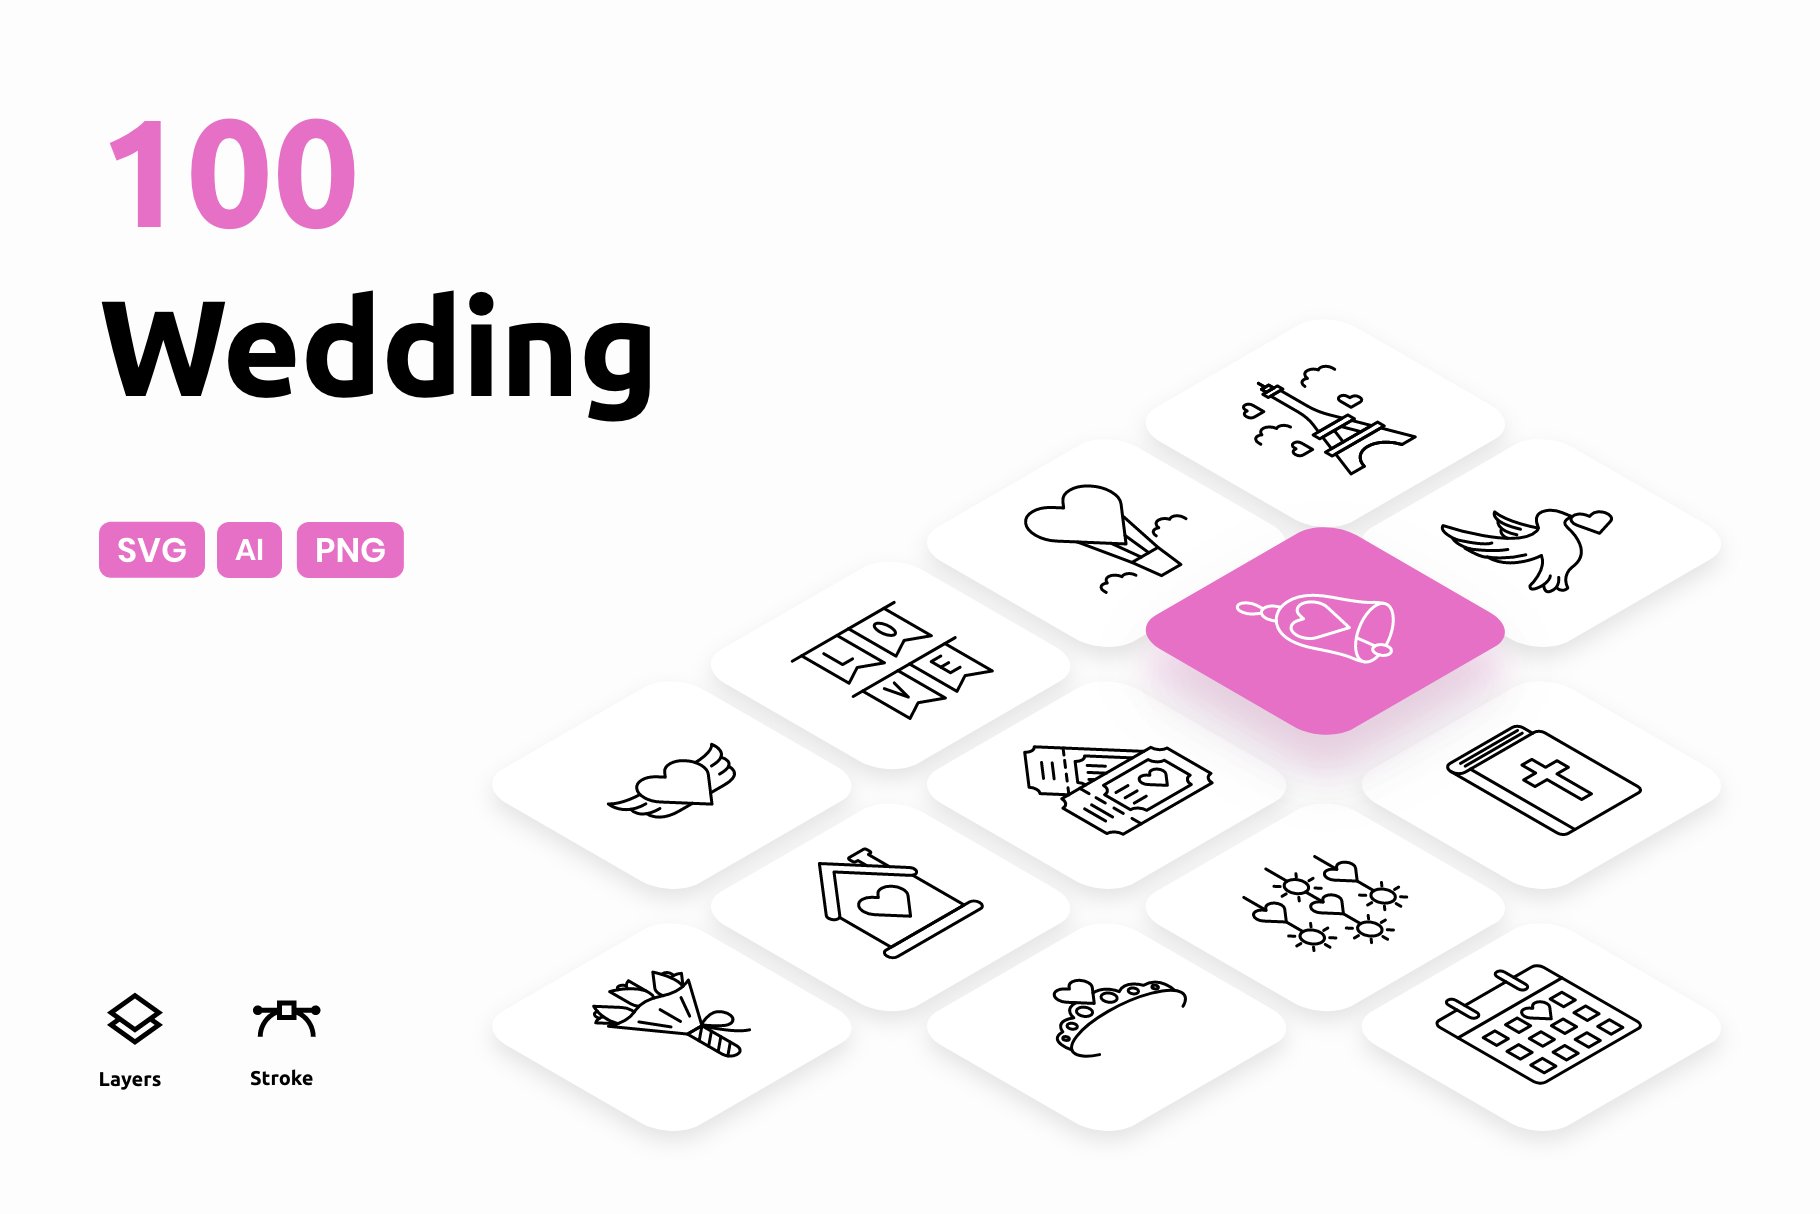 Wedding - Icons Pack cover image.